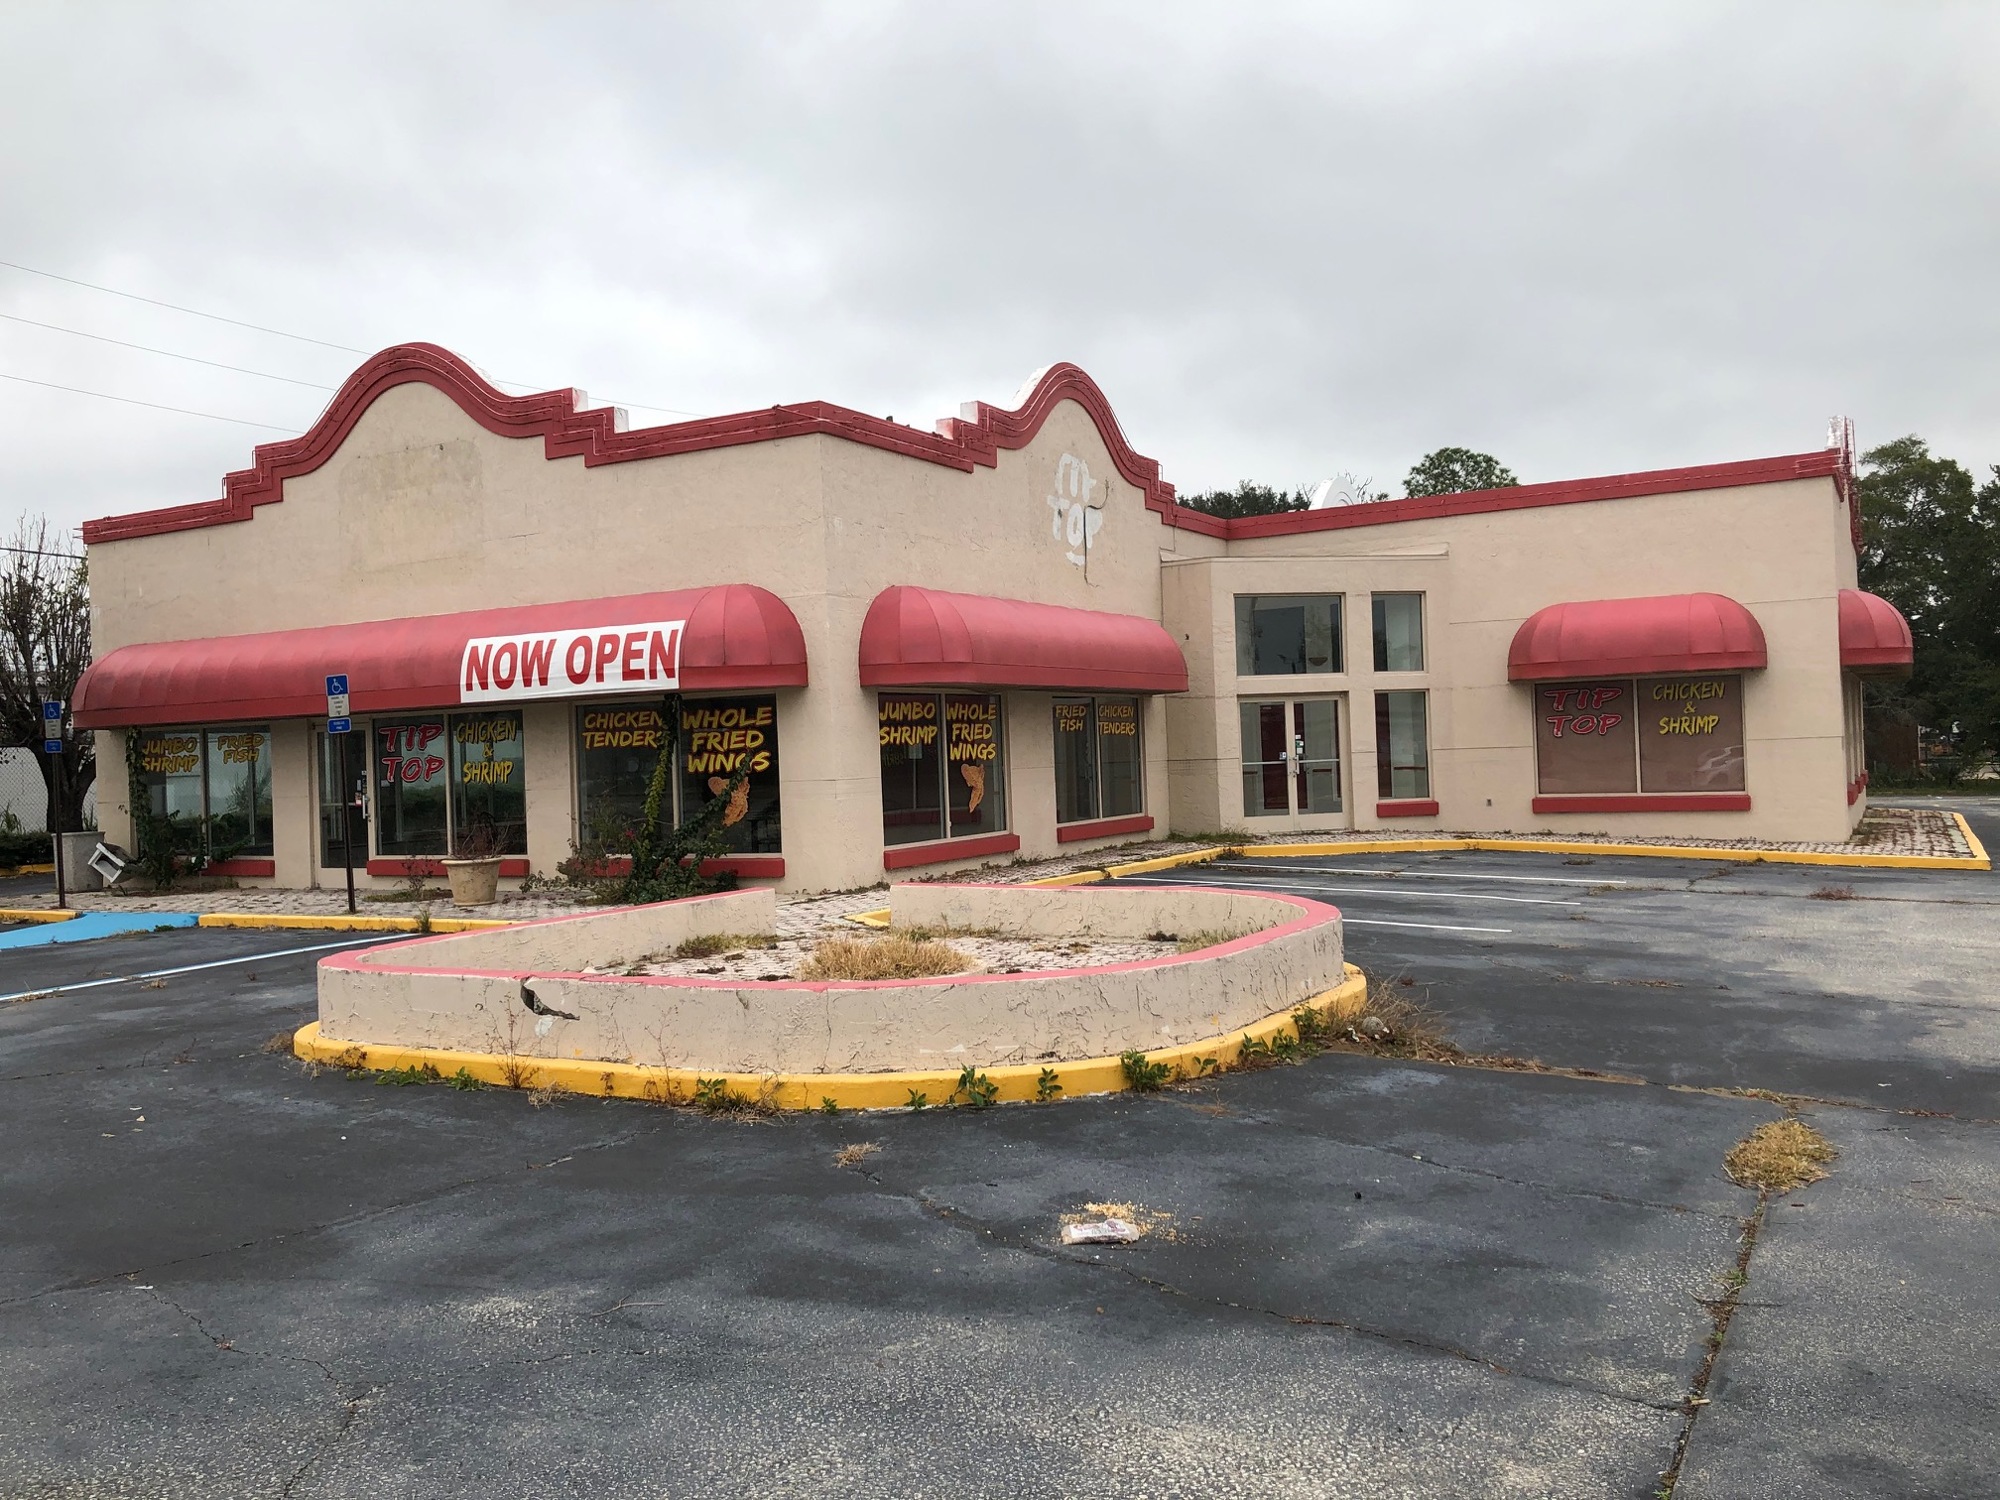 An investment group plans to buy and tear down the building at 101 Monument Road and build a Culver’s. It was a Miami Subs from 1995-2003 and most recently was Tip Top Chicken & Shrimp.